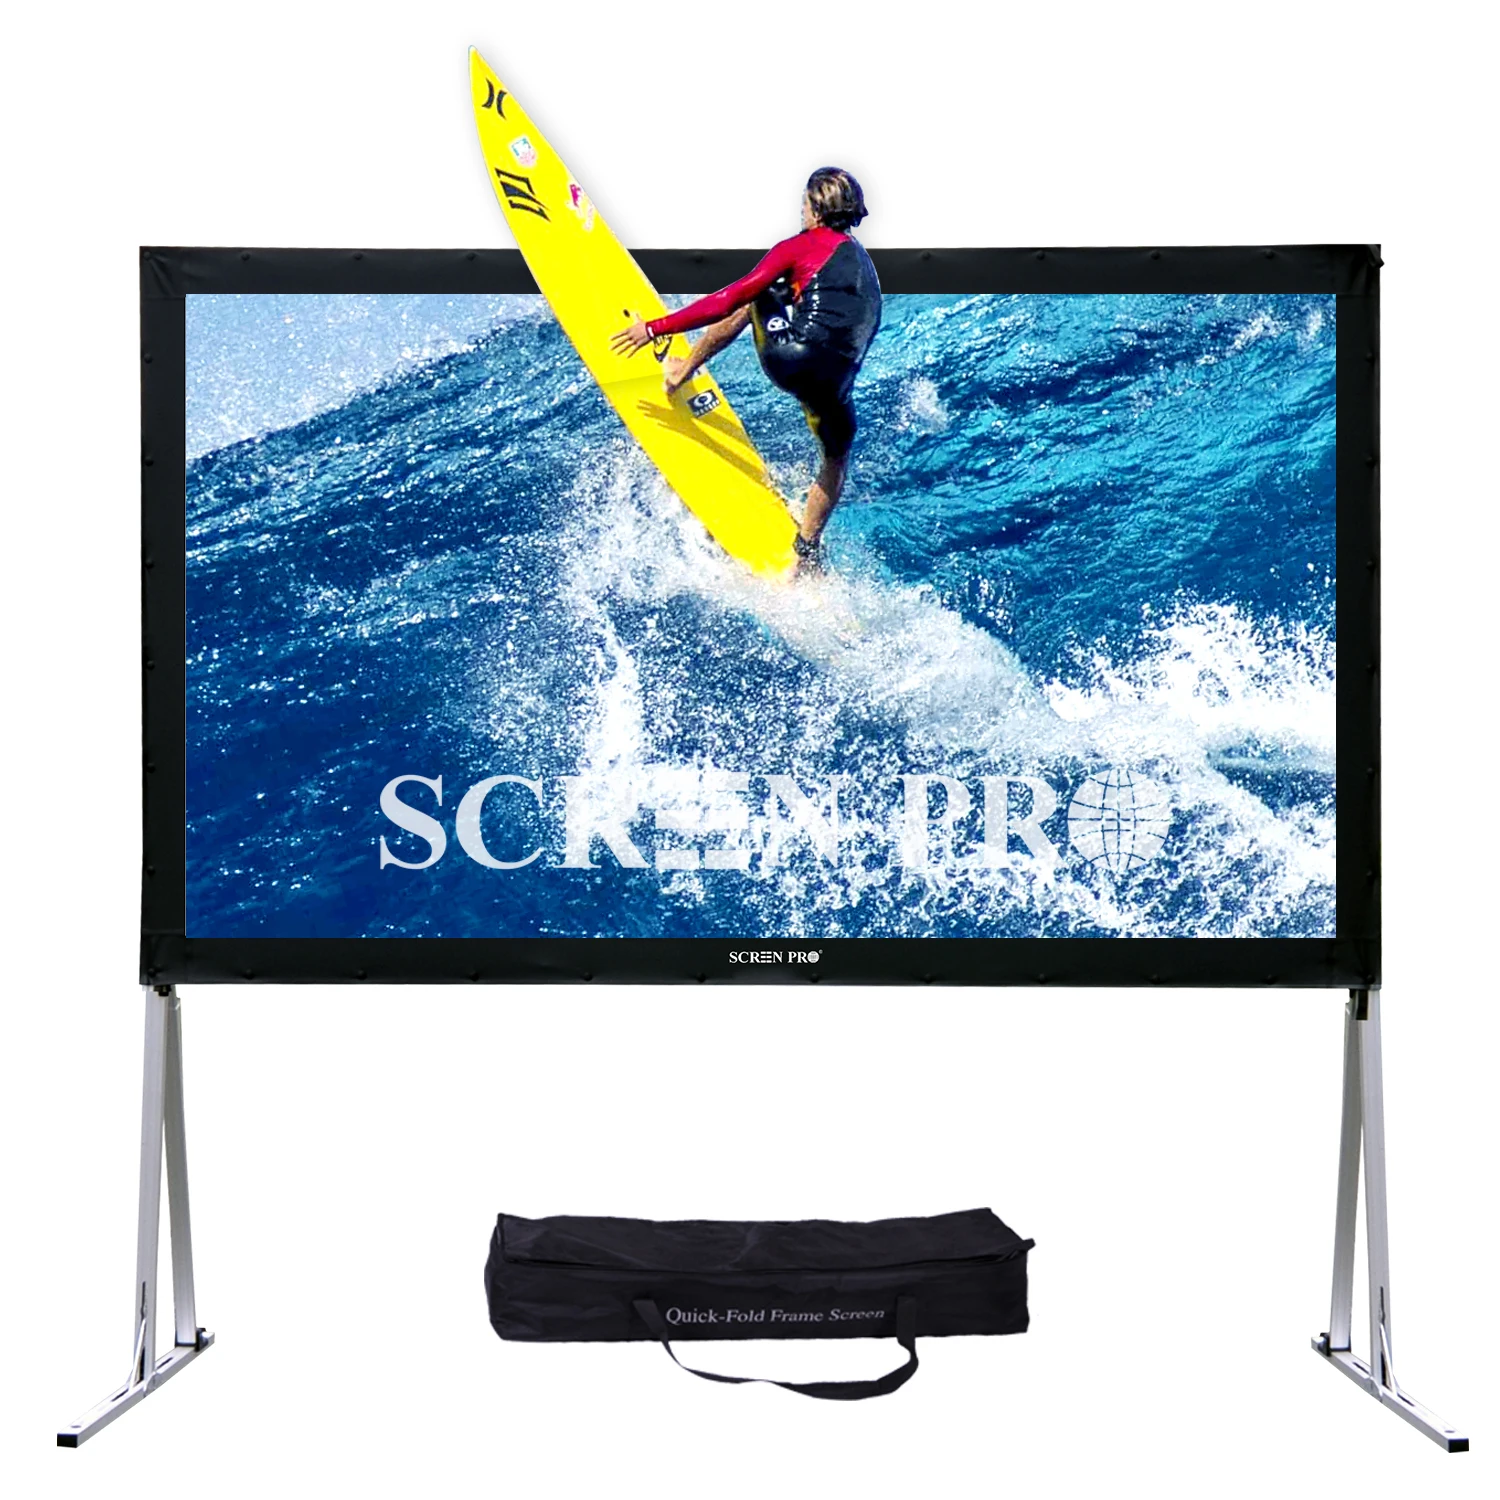 

Screen Pro 110 Inches 16:9 rear Matte white fast fold projection screen portable easy carrying box Projector Projection Screen, Aluminum frame